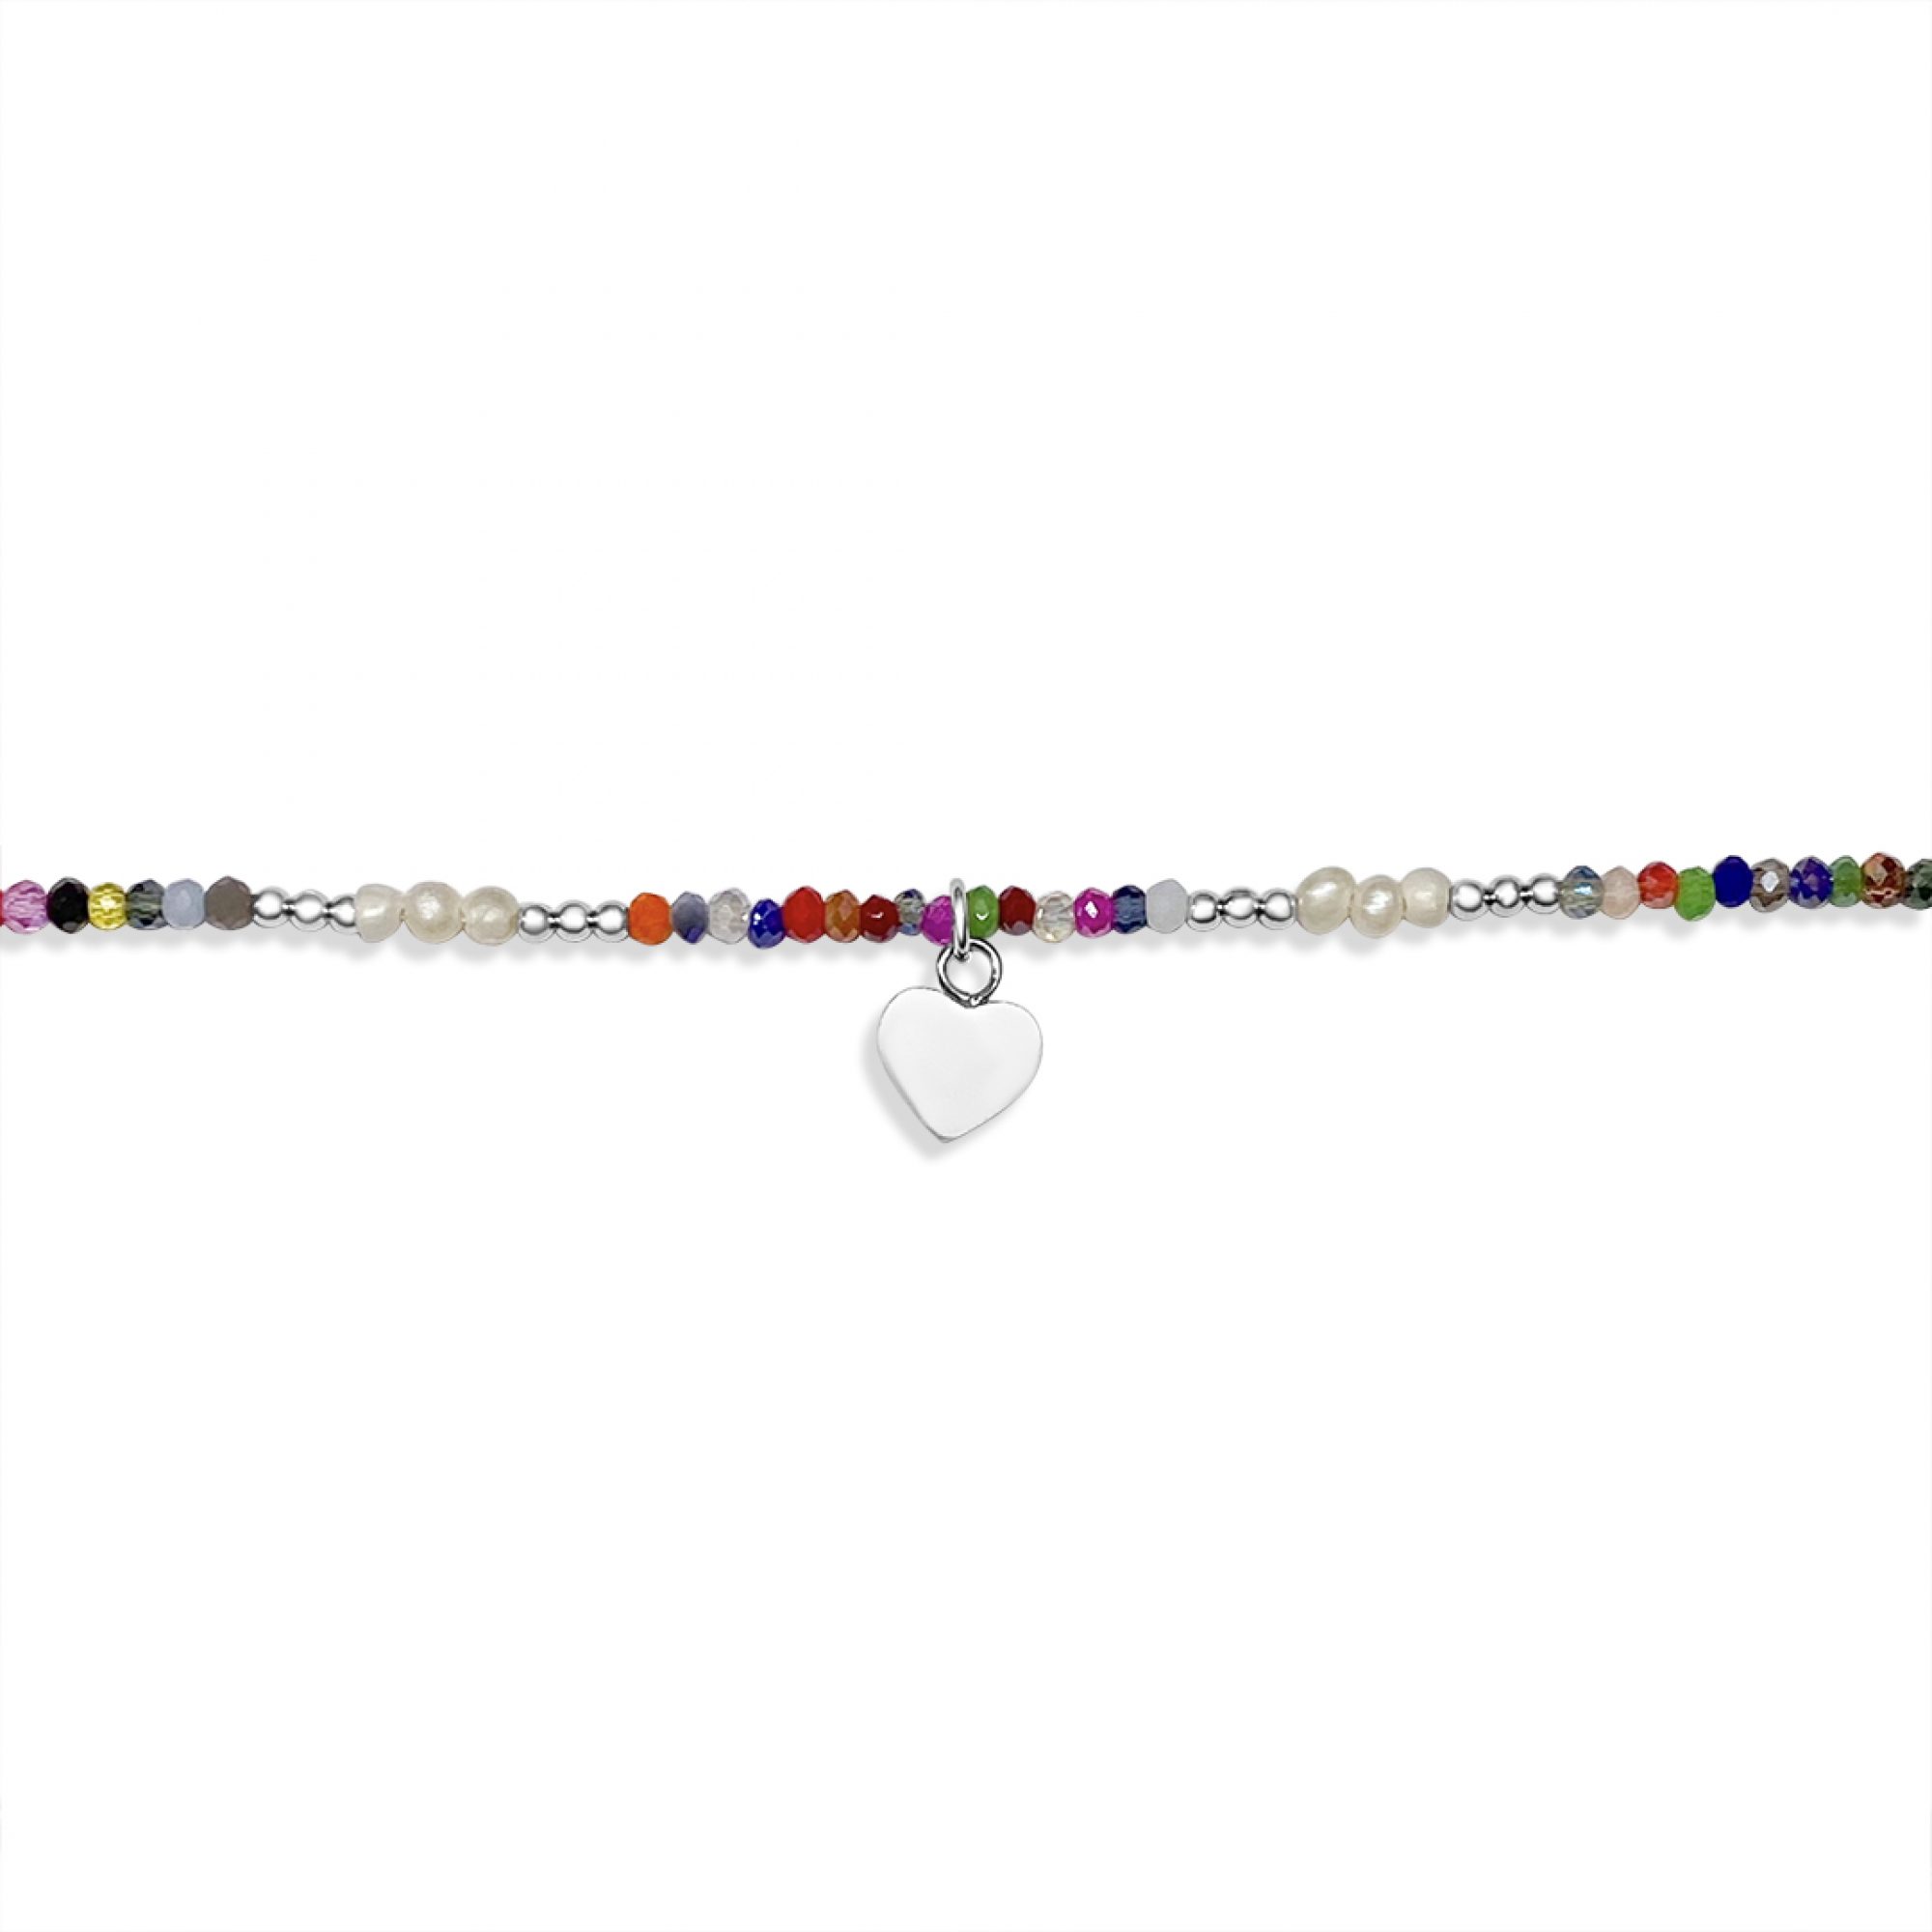 Anklet with multicoloured beads and a heart dangle